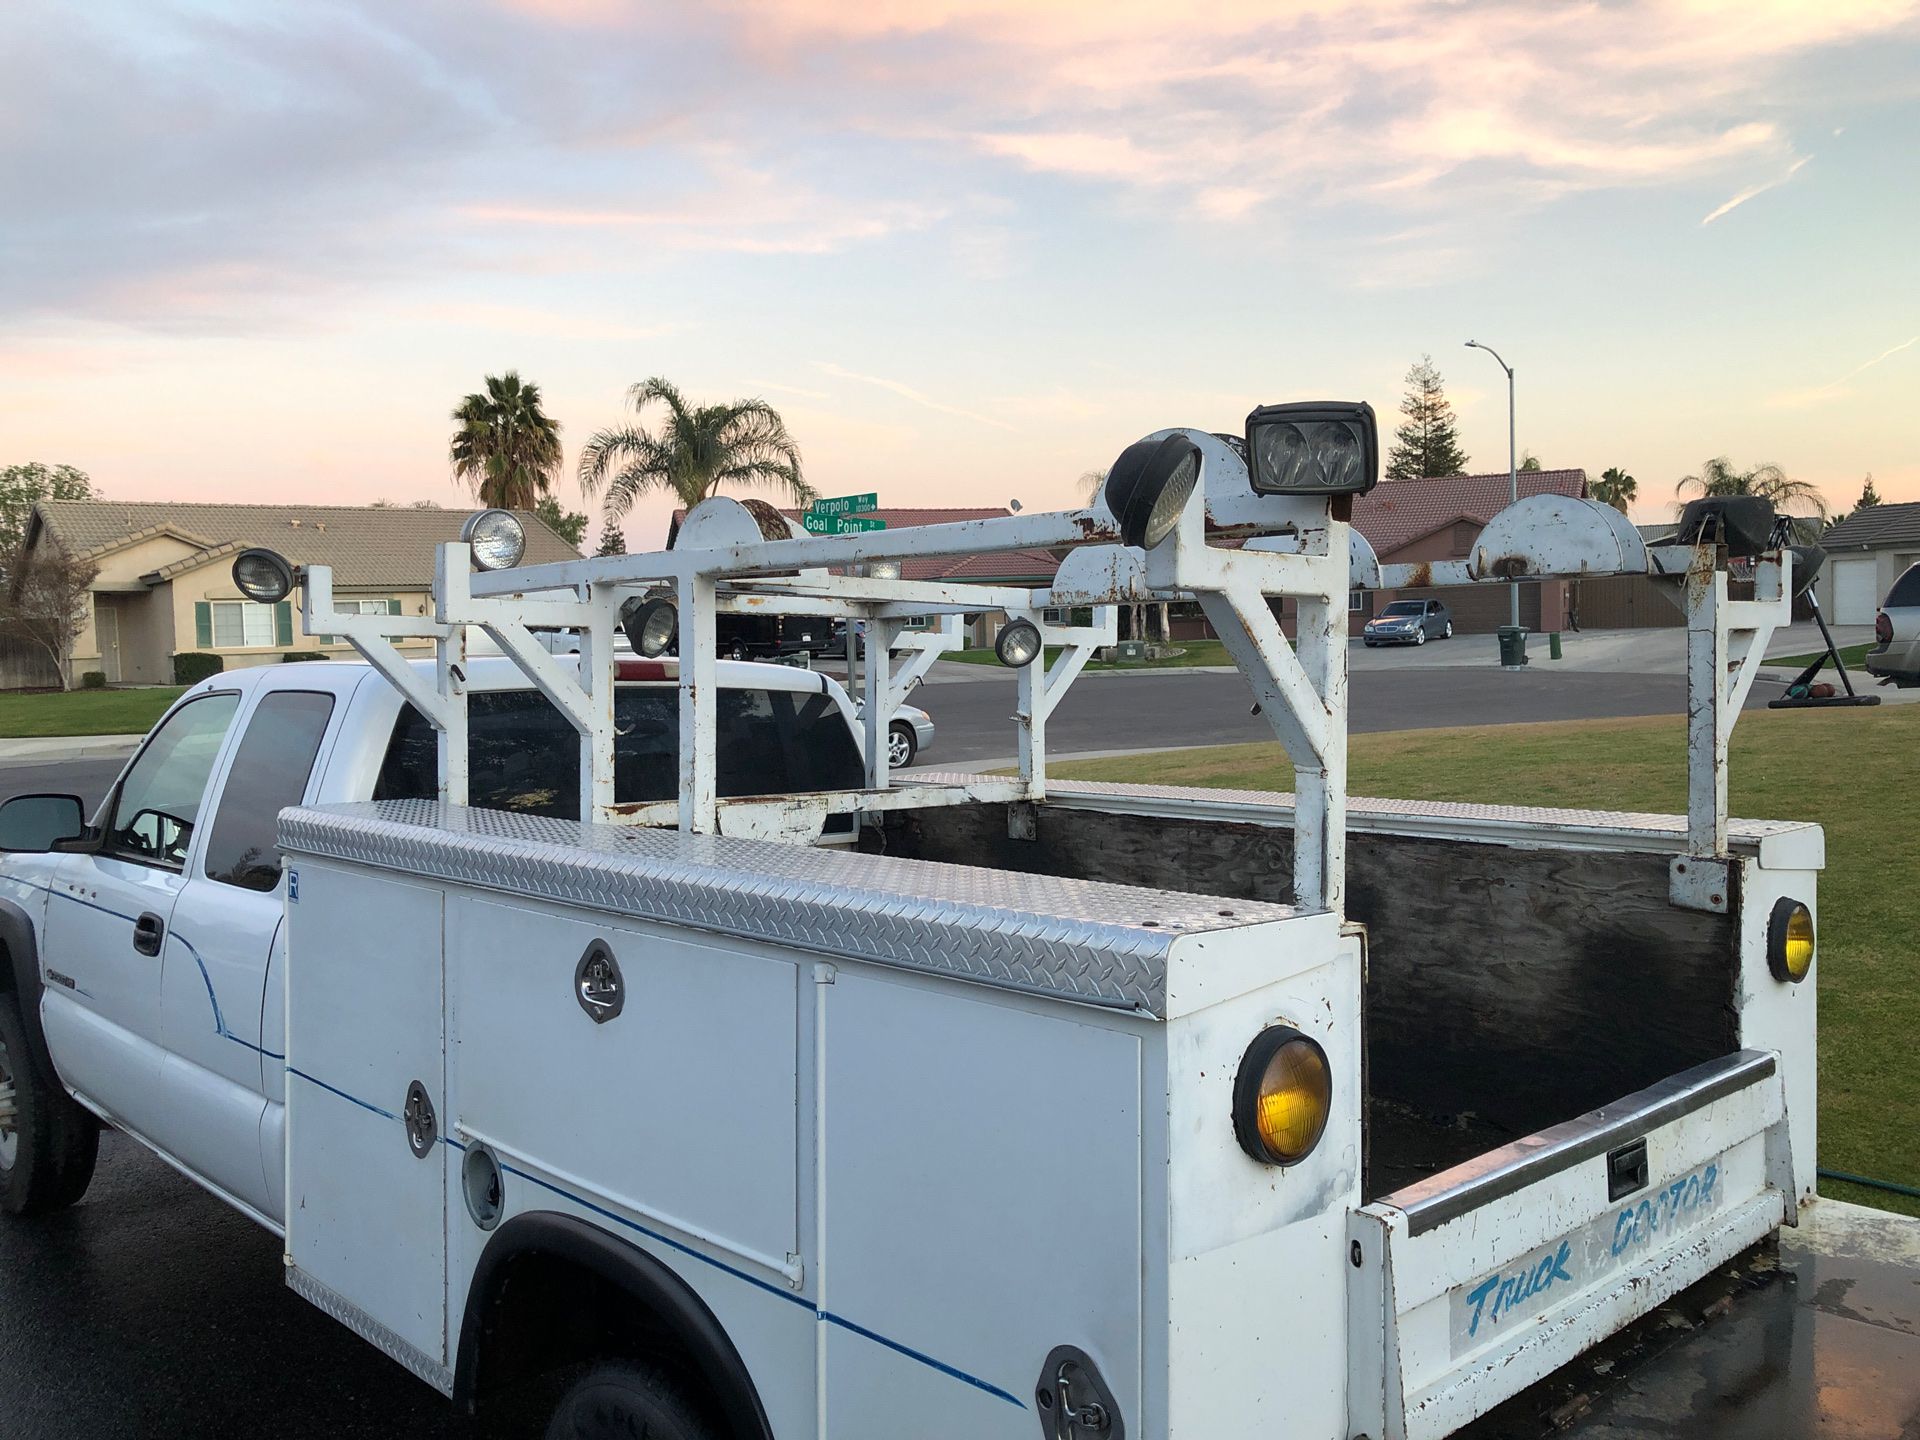 Nice heavy duty ladder rack with lights and spots for cords and hoses